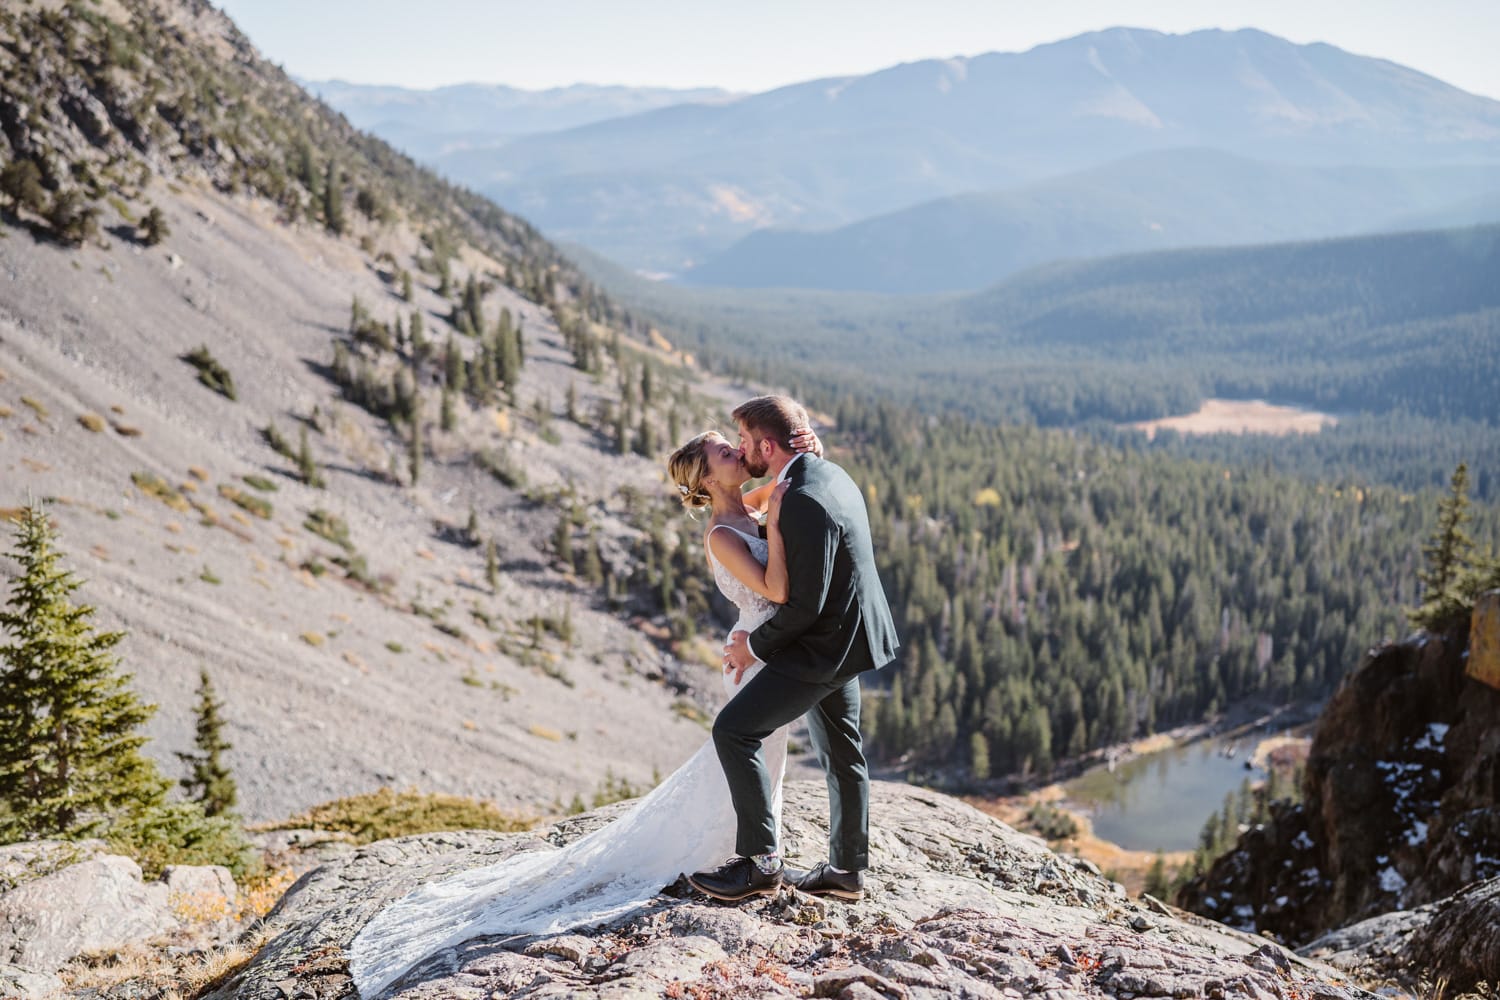 A bride and groom sharing a kiss at sunrise overlooking the mountains of Colorado.